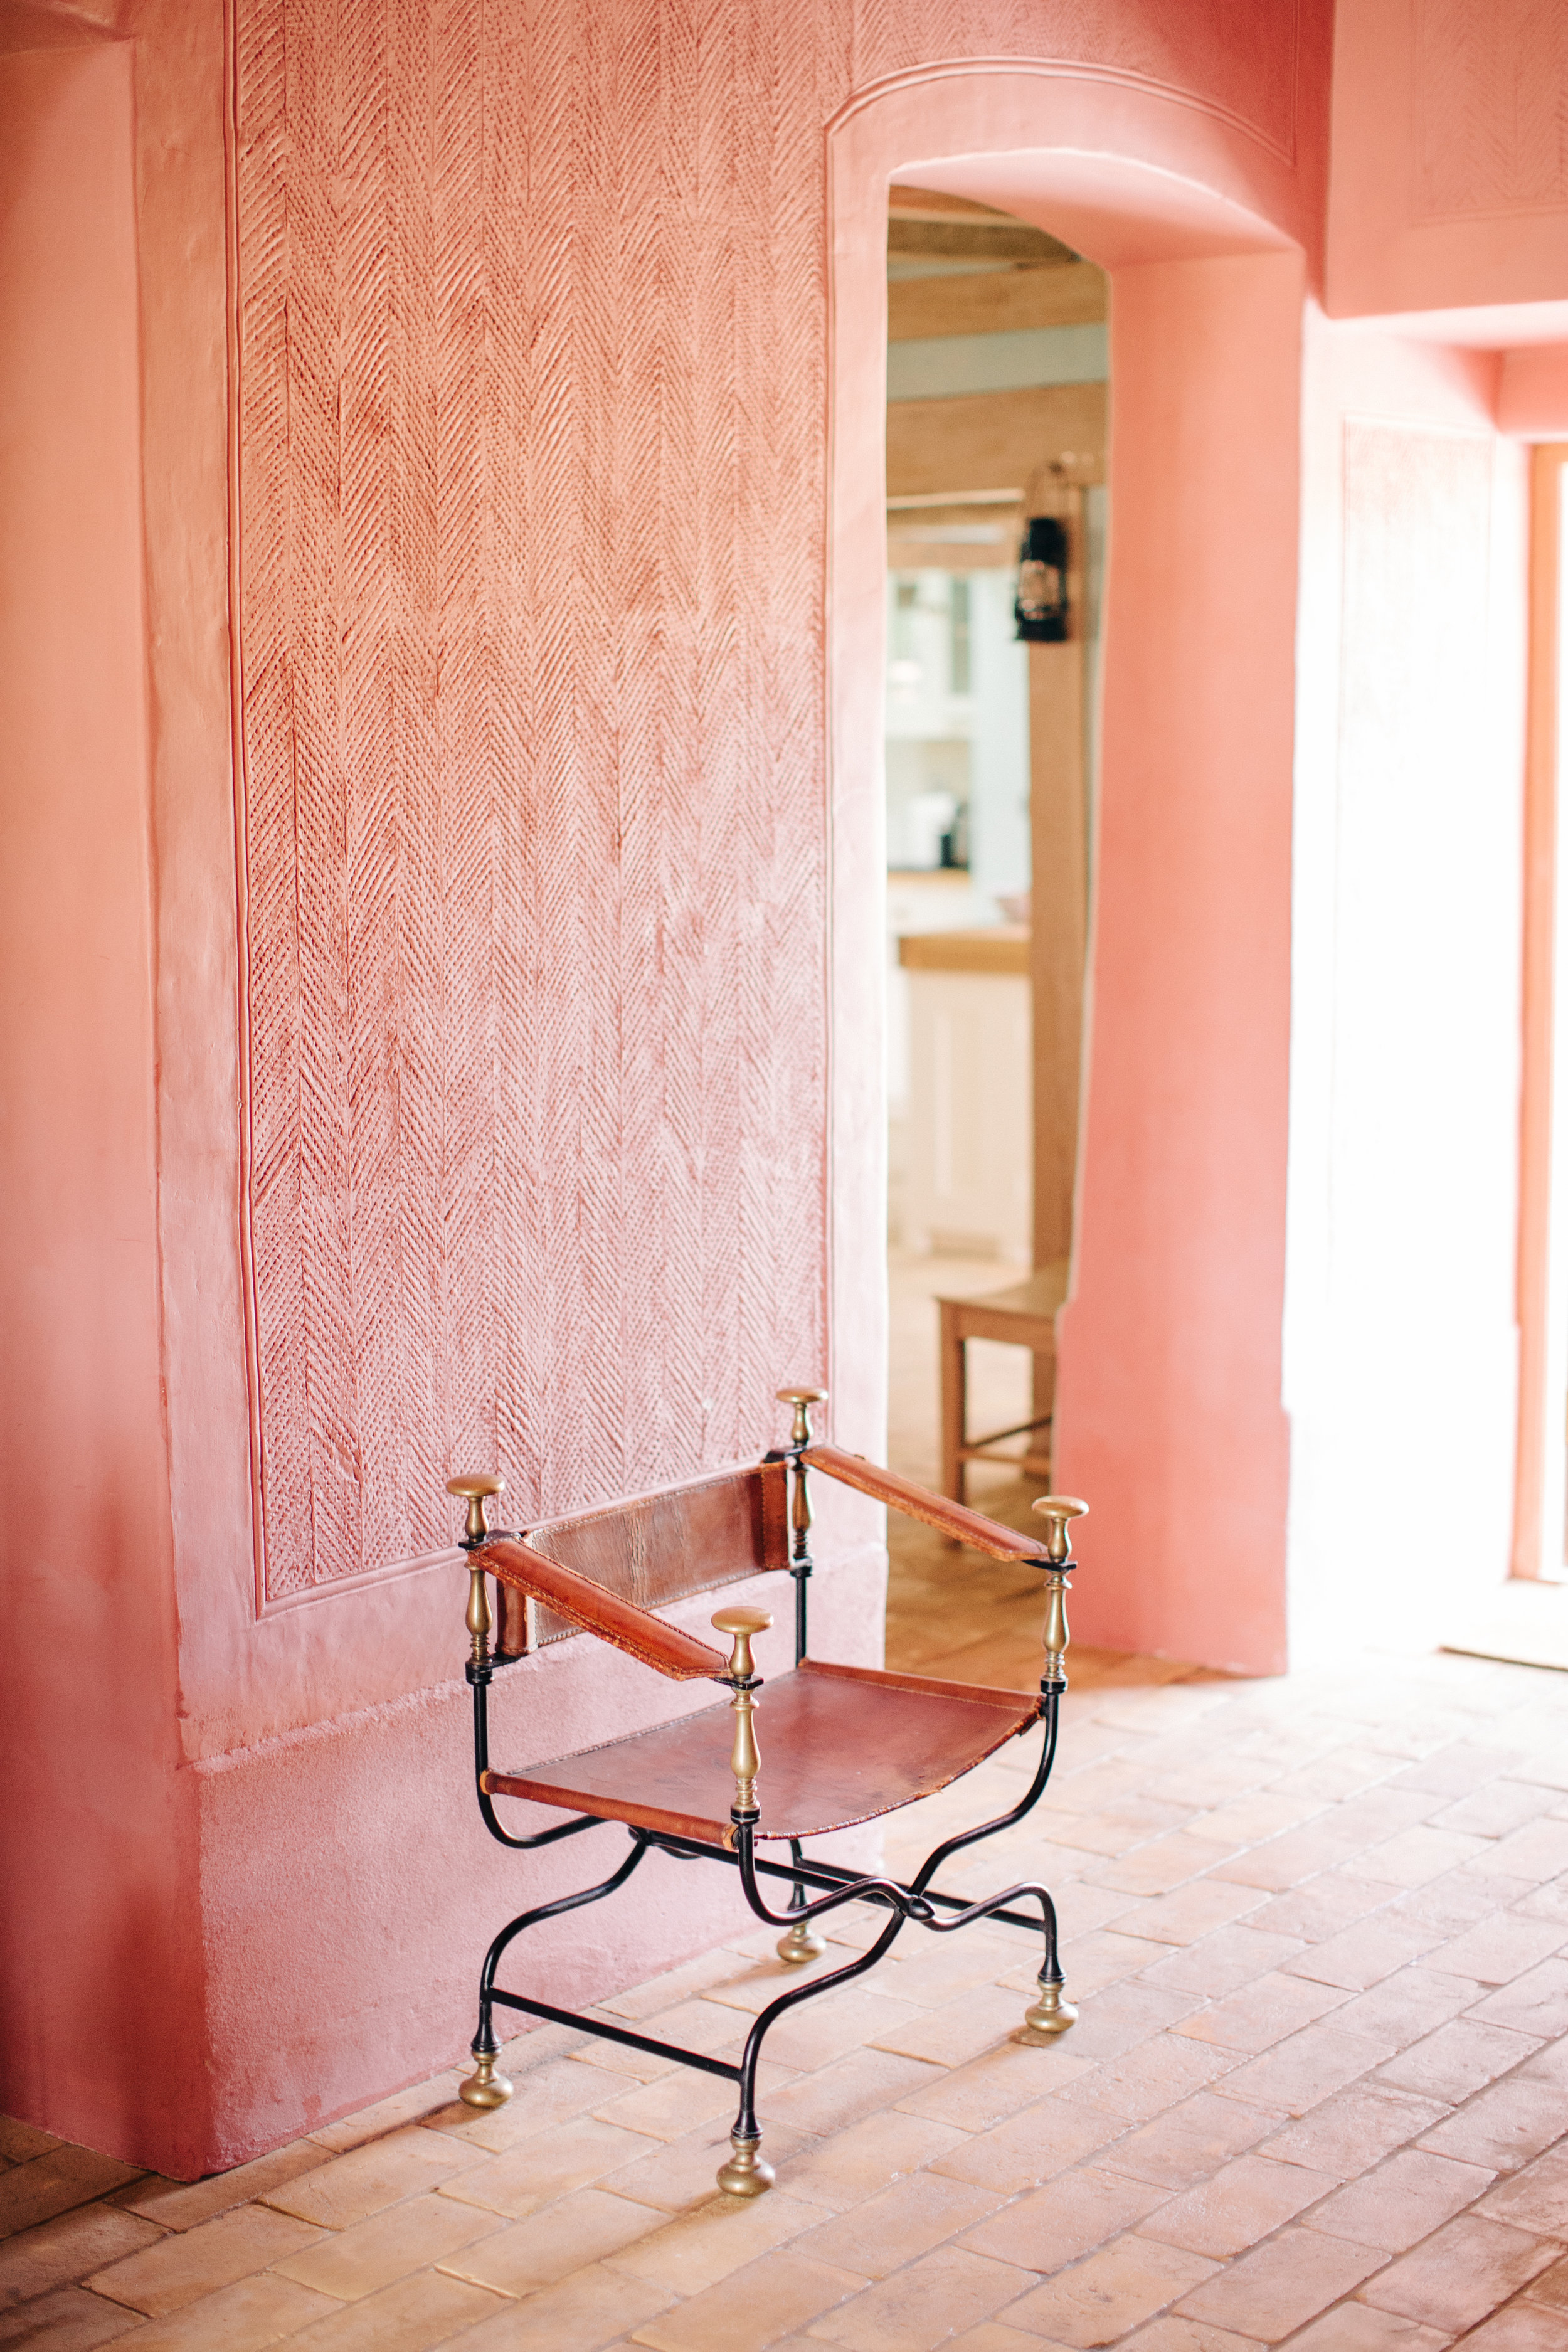 The Farmhouse’s intricate details and carvings - and more pink!